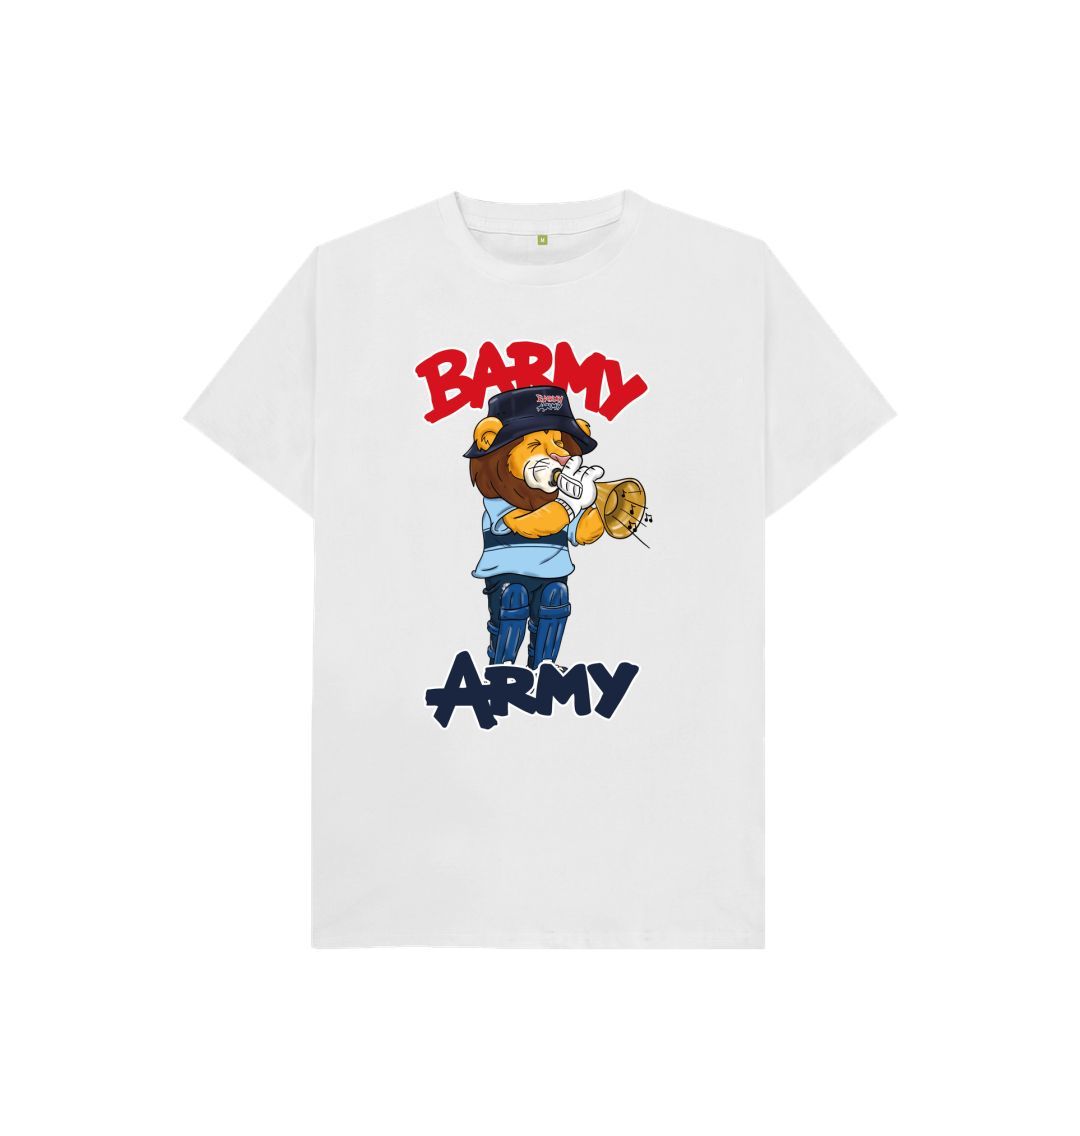 White Barmy Army Trumpet Mascot Tees - Juniors